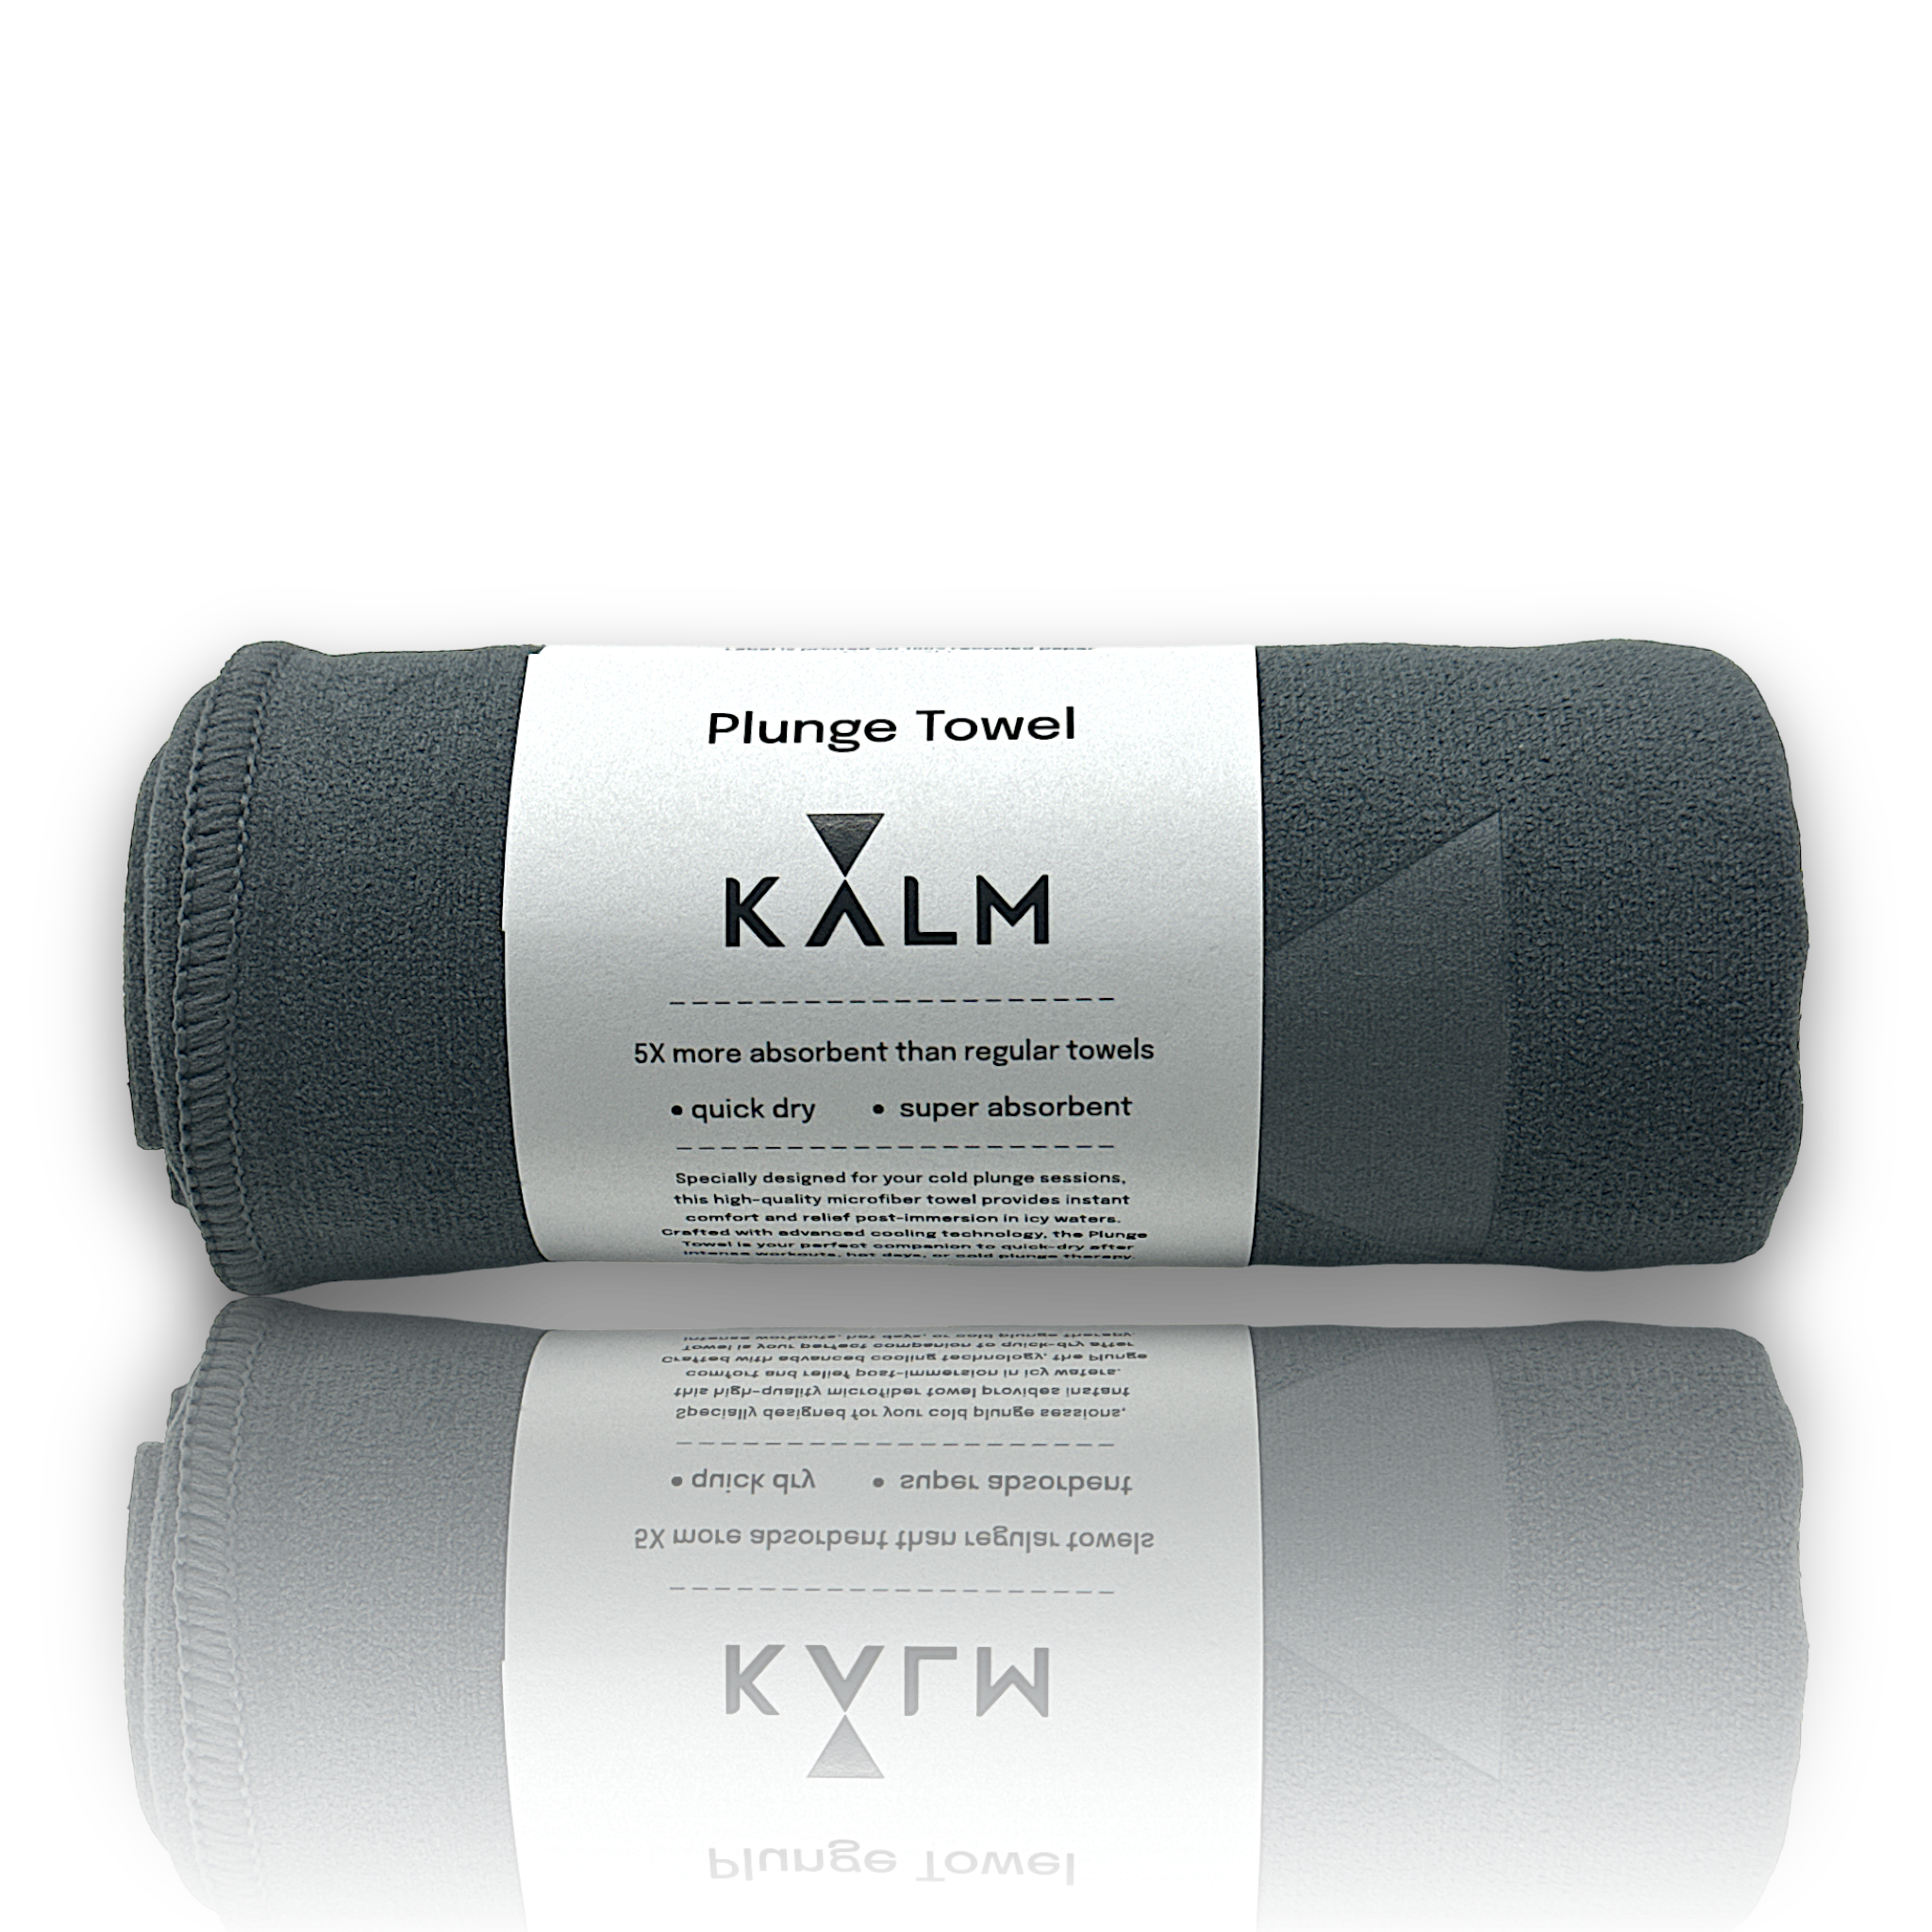 The Plunge Towel